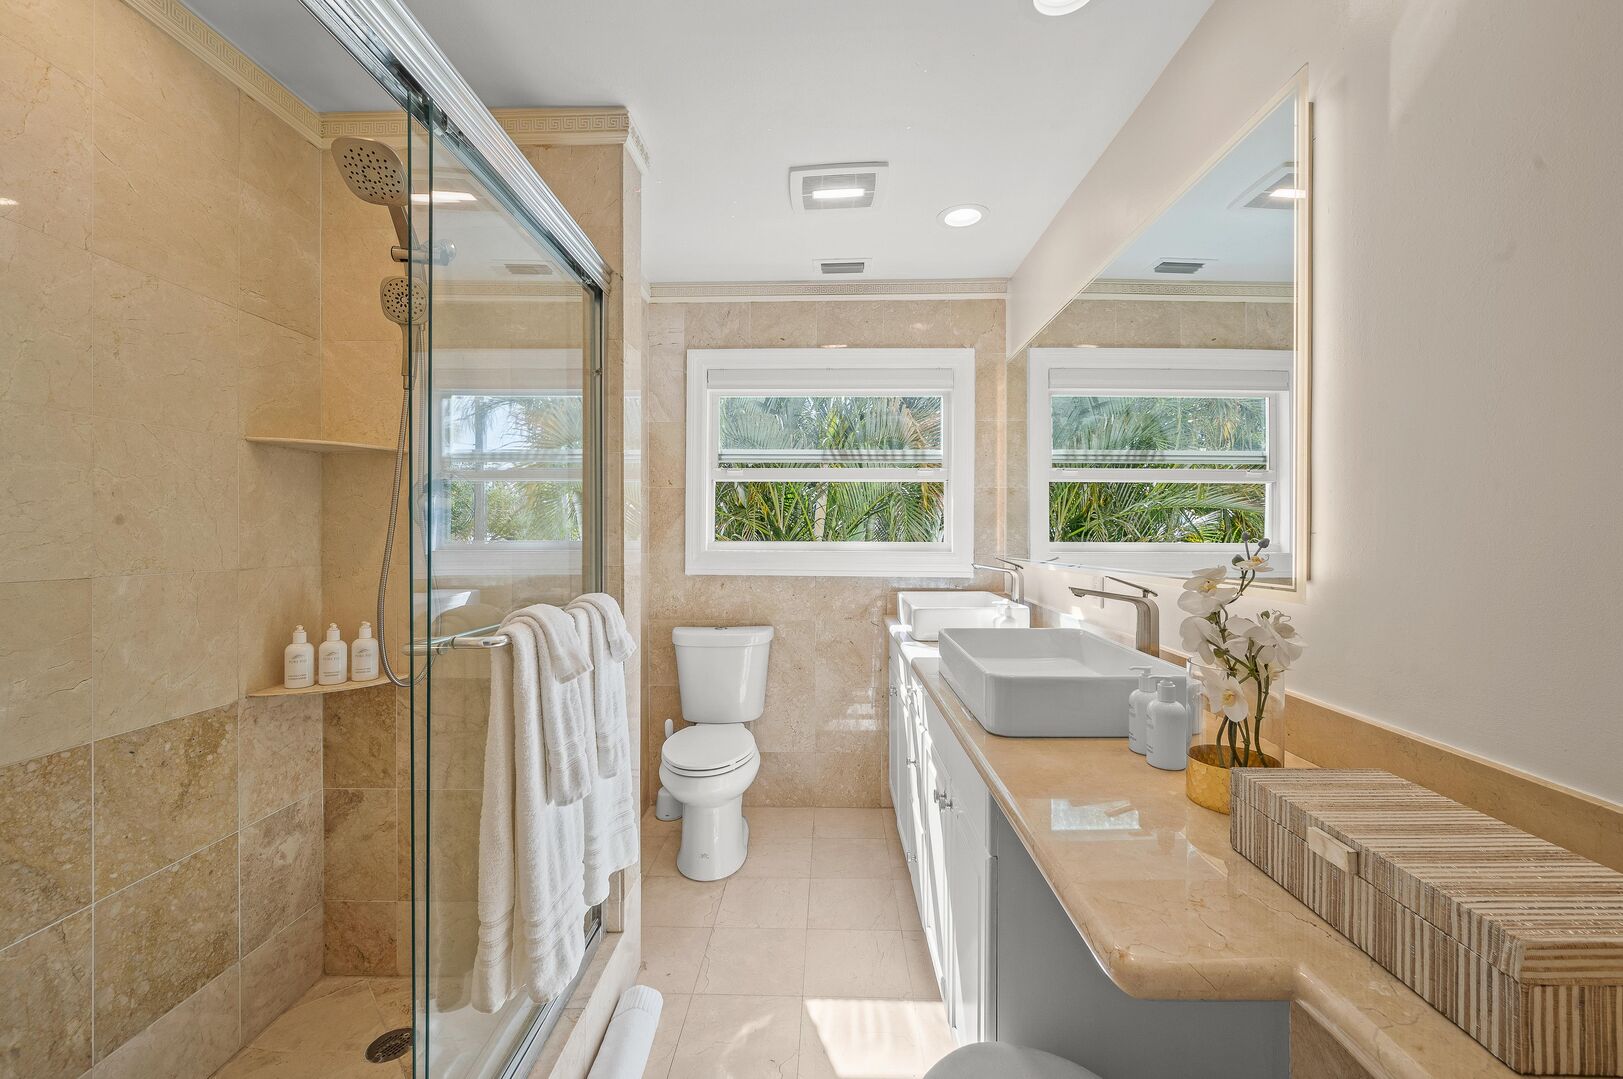 The upstairs bathroom features a walk in shower, double vanity and spa like amenities.